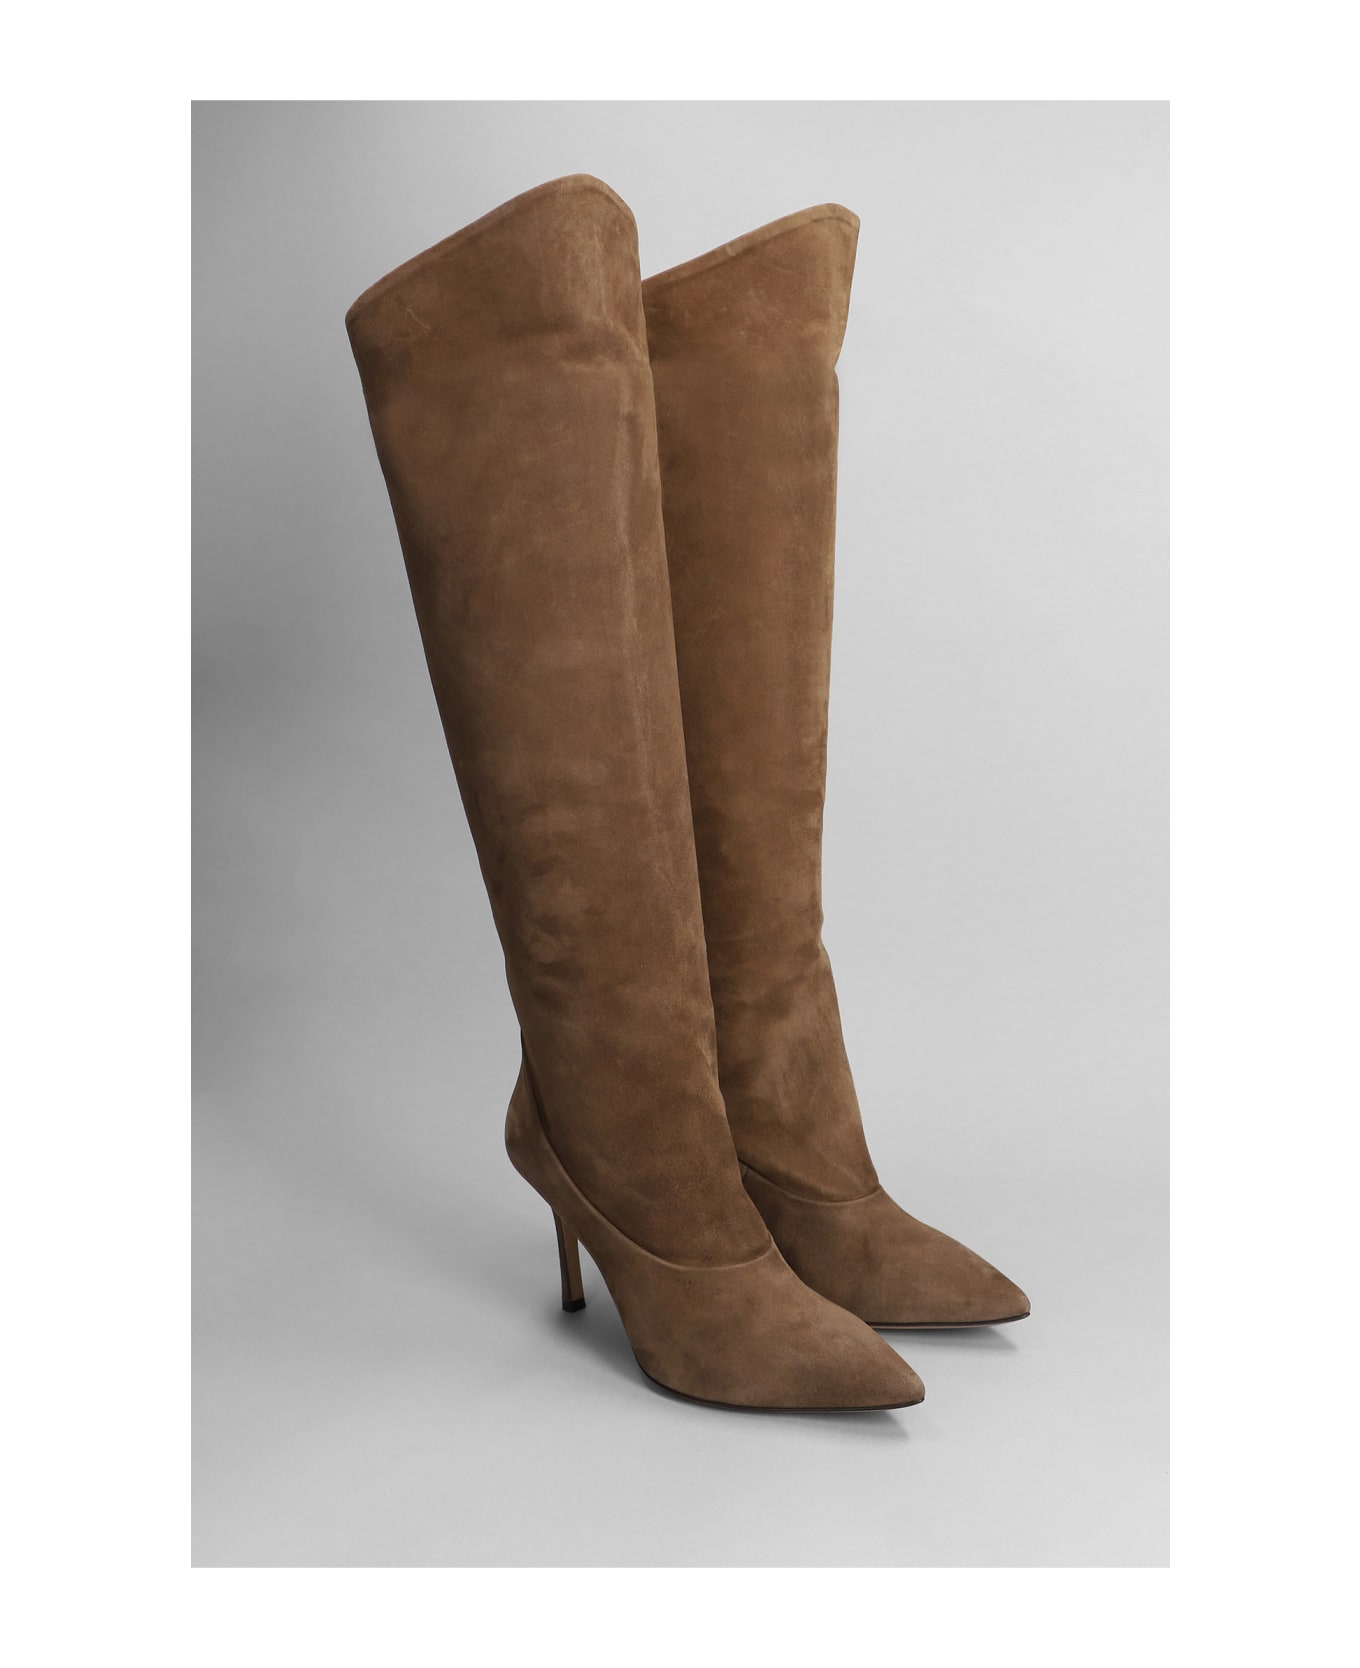 The Seller High Heels Boots In Leather Color Suede - leather color